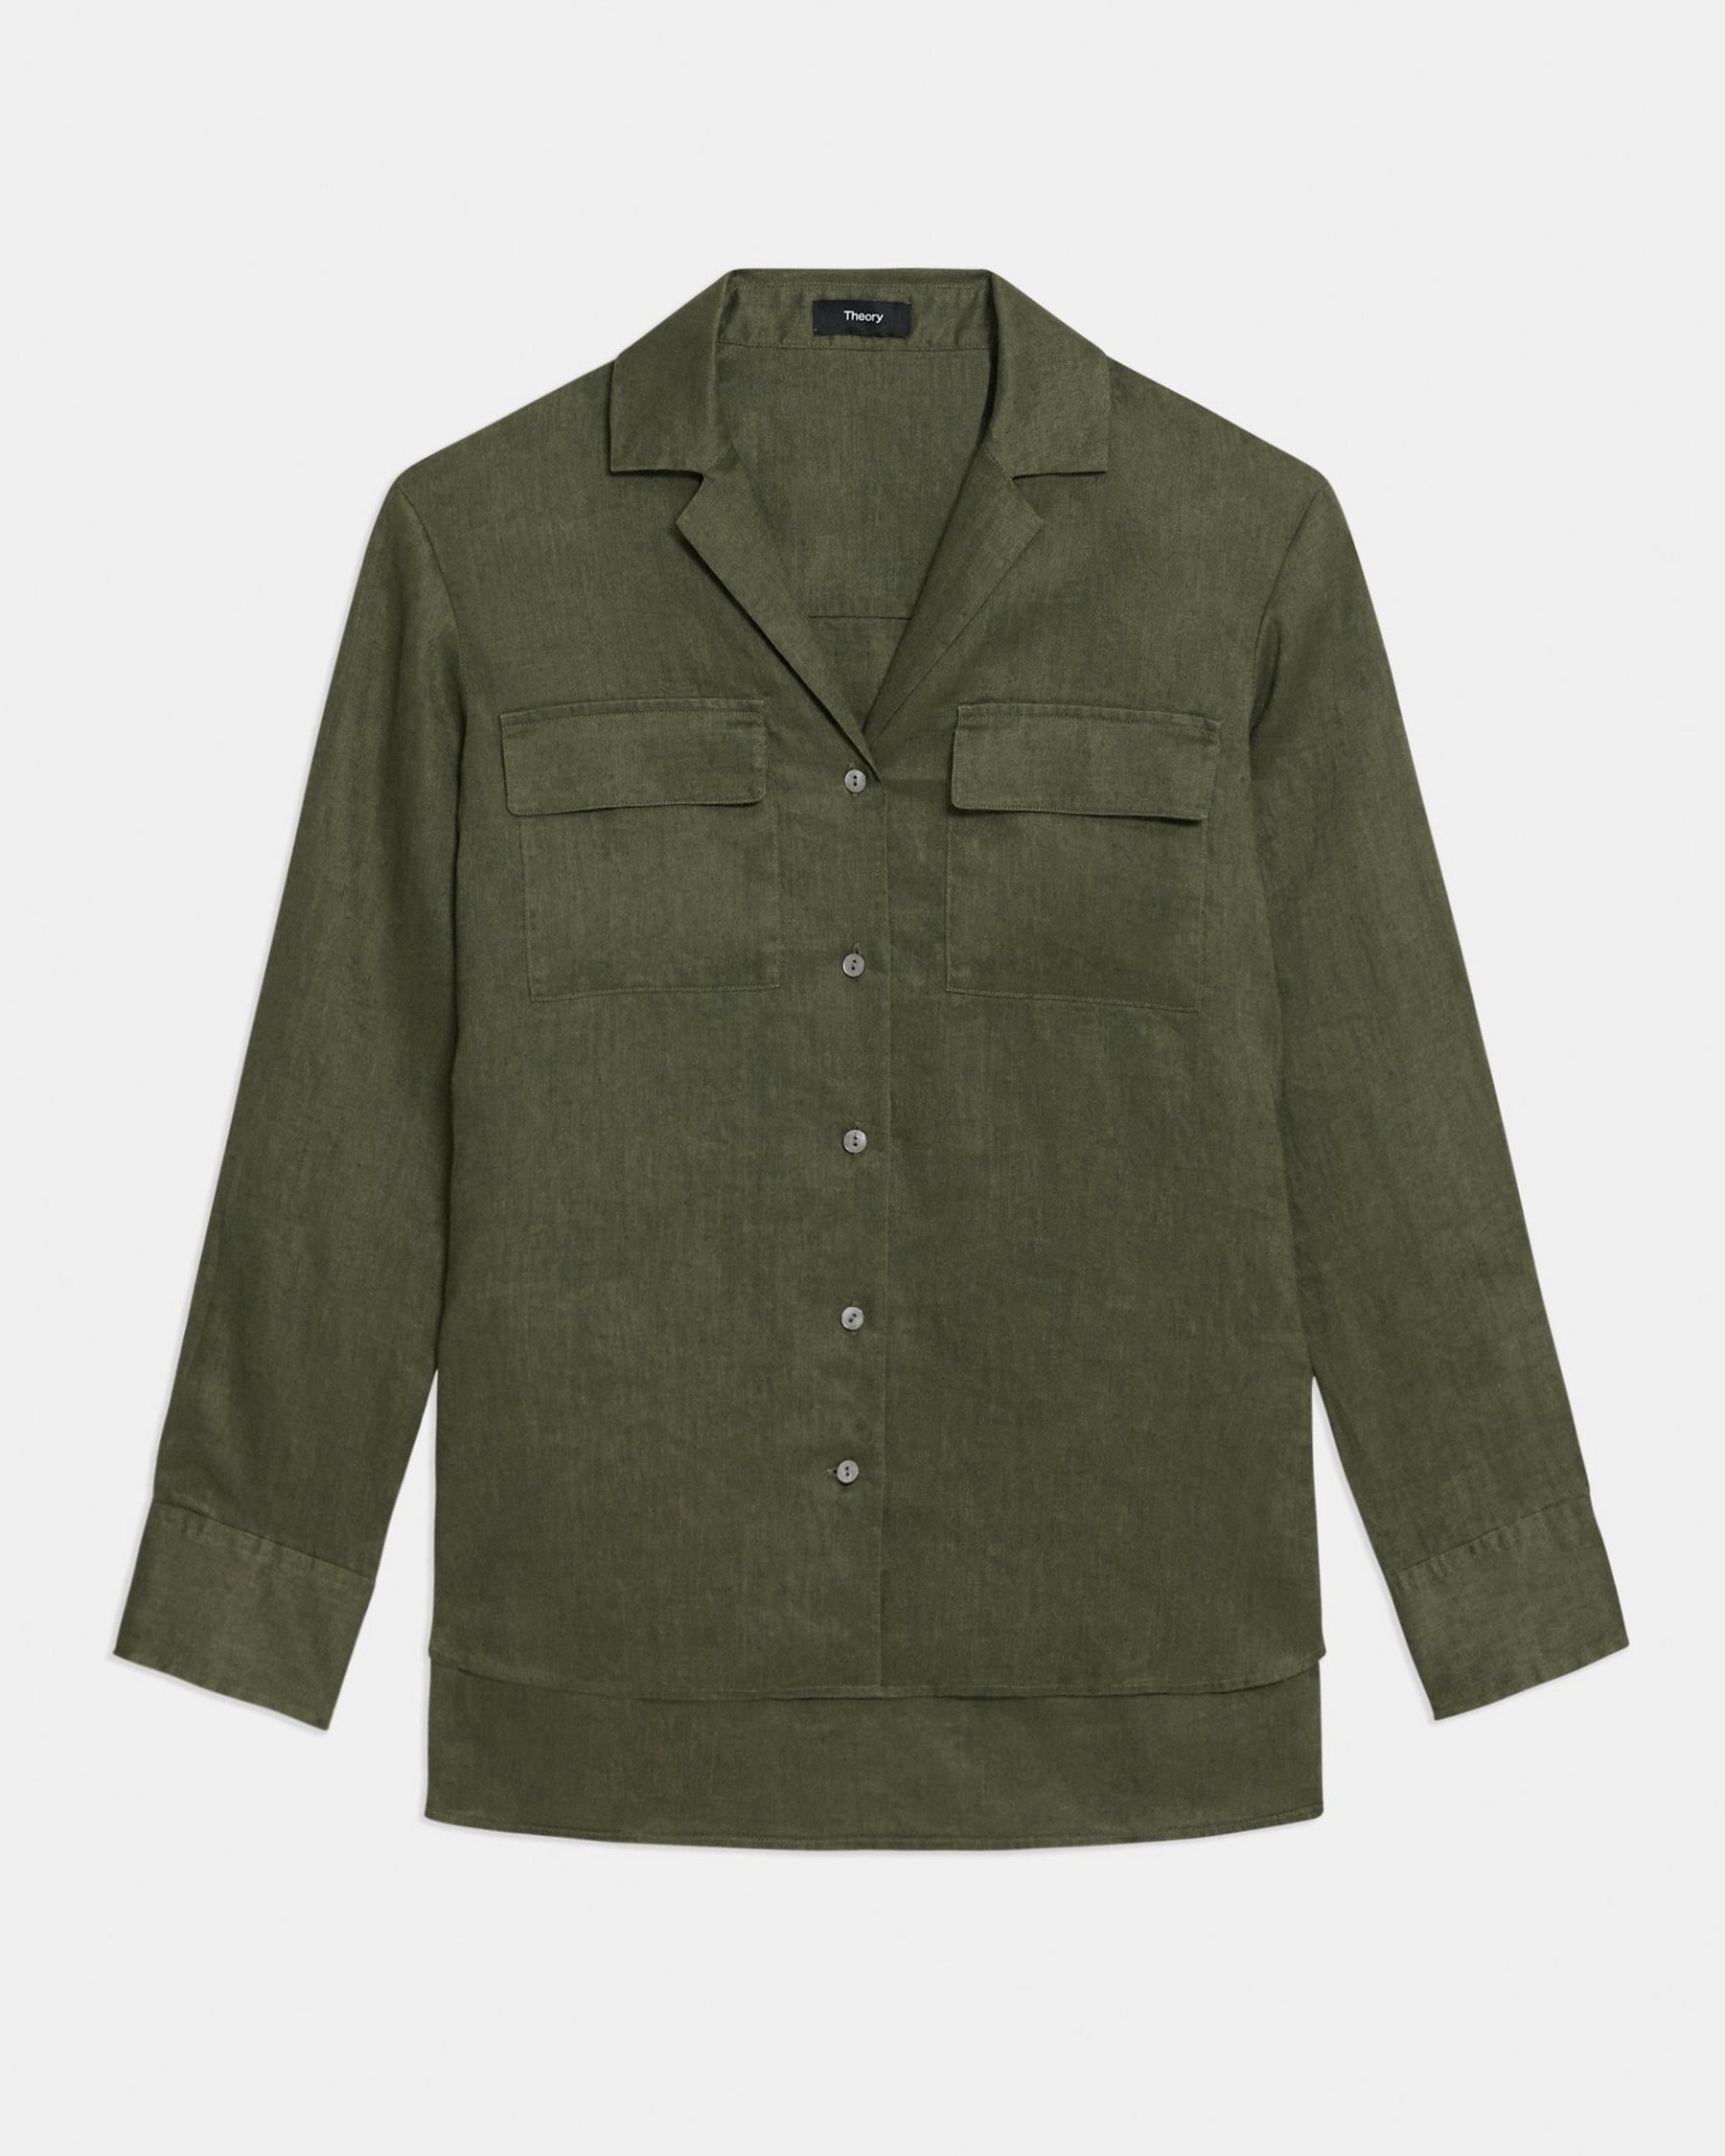 Oversized Patch Pocket Shirt in Relaxed Linen